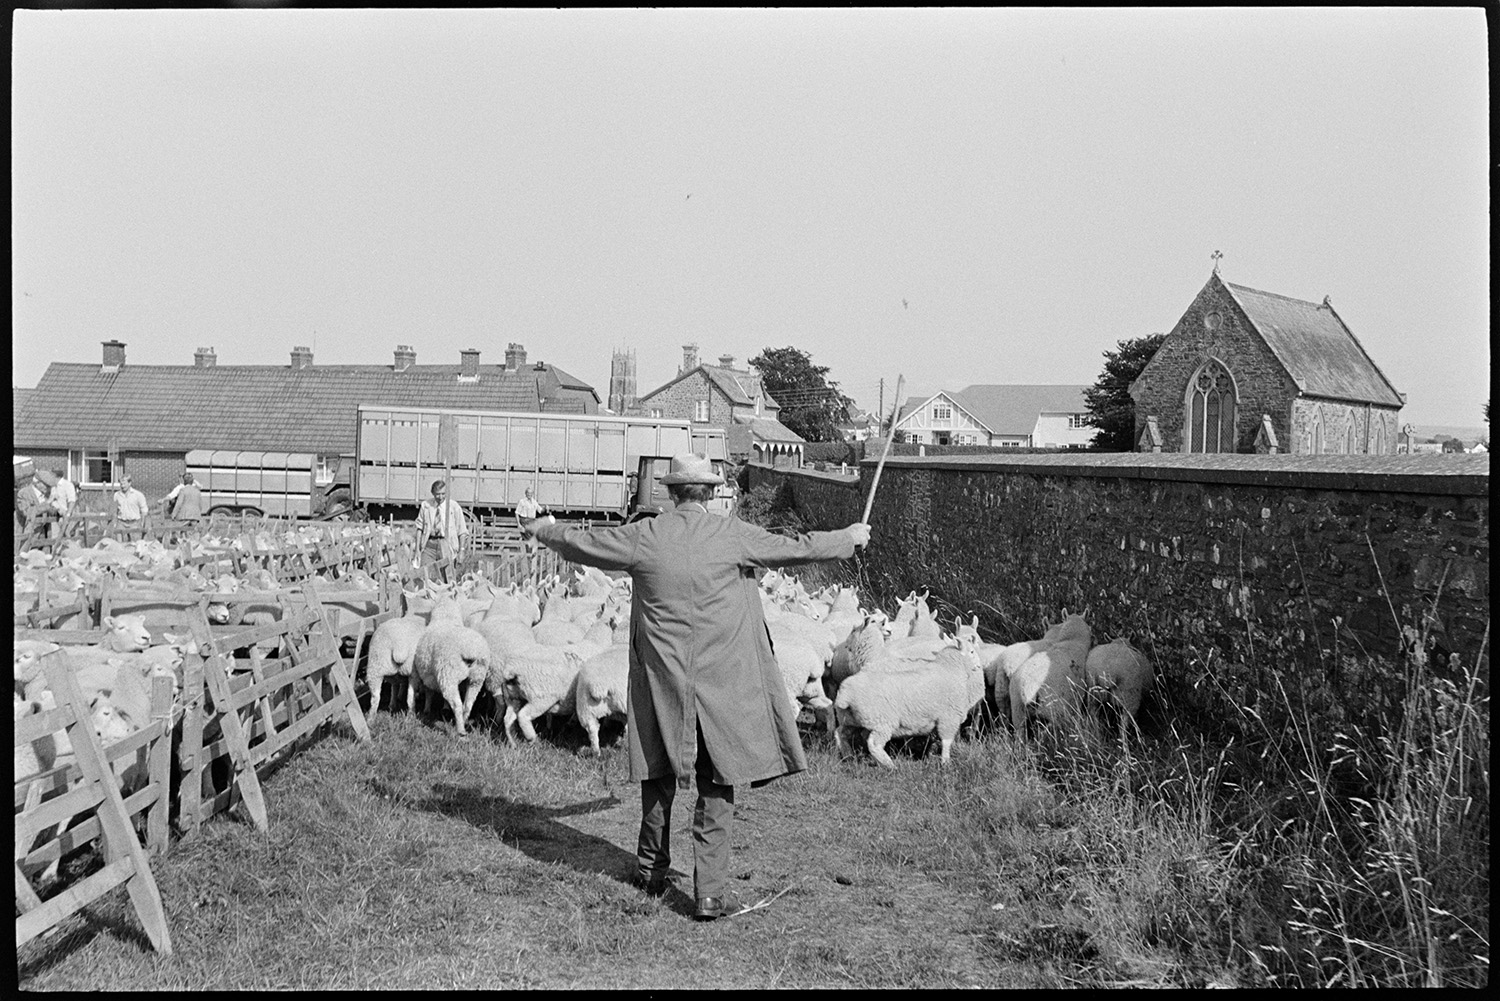 Sheep fair, farmers, auctioneers moving along pens of sheep on hot day. Overview towards town. 
[A man herding sheep between a stone wall and other sheep pens at South Molton Sheep Fair. A livestock lorry, houses and a chapel can be seen in the background.]